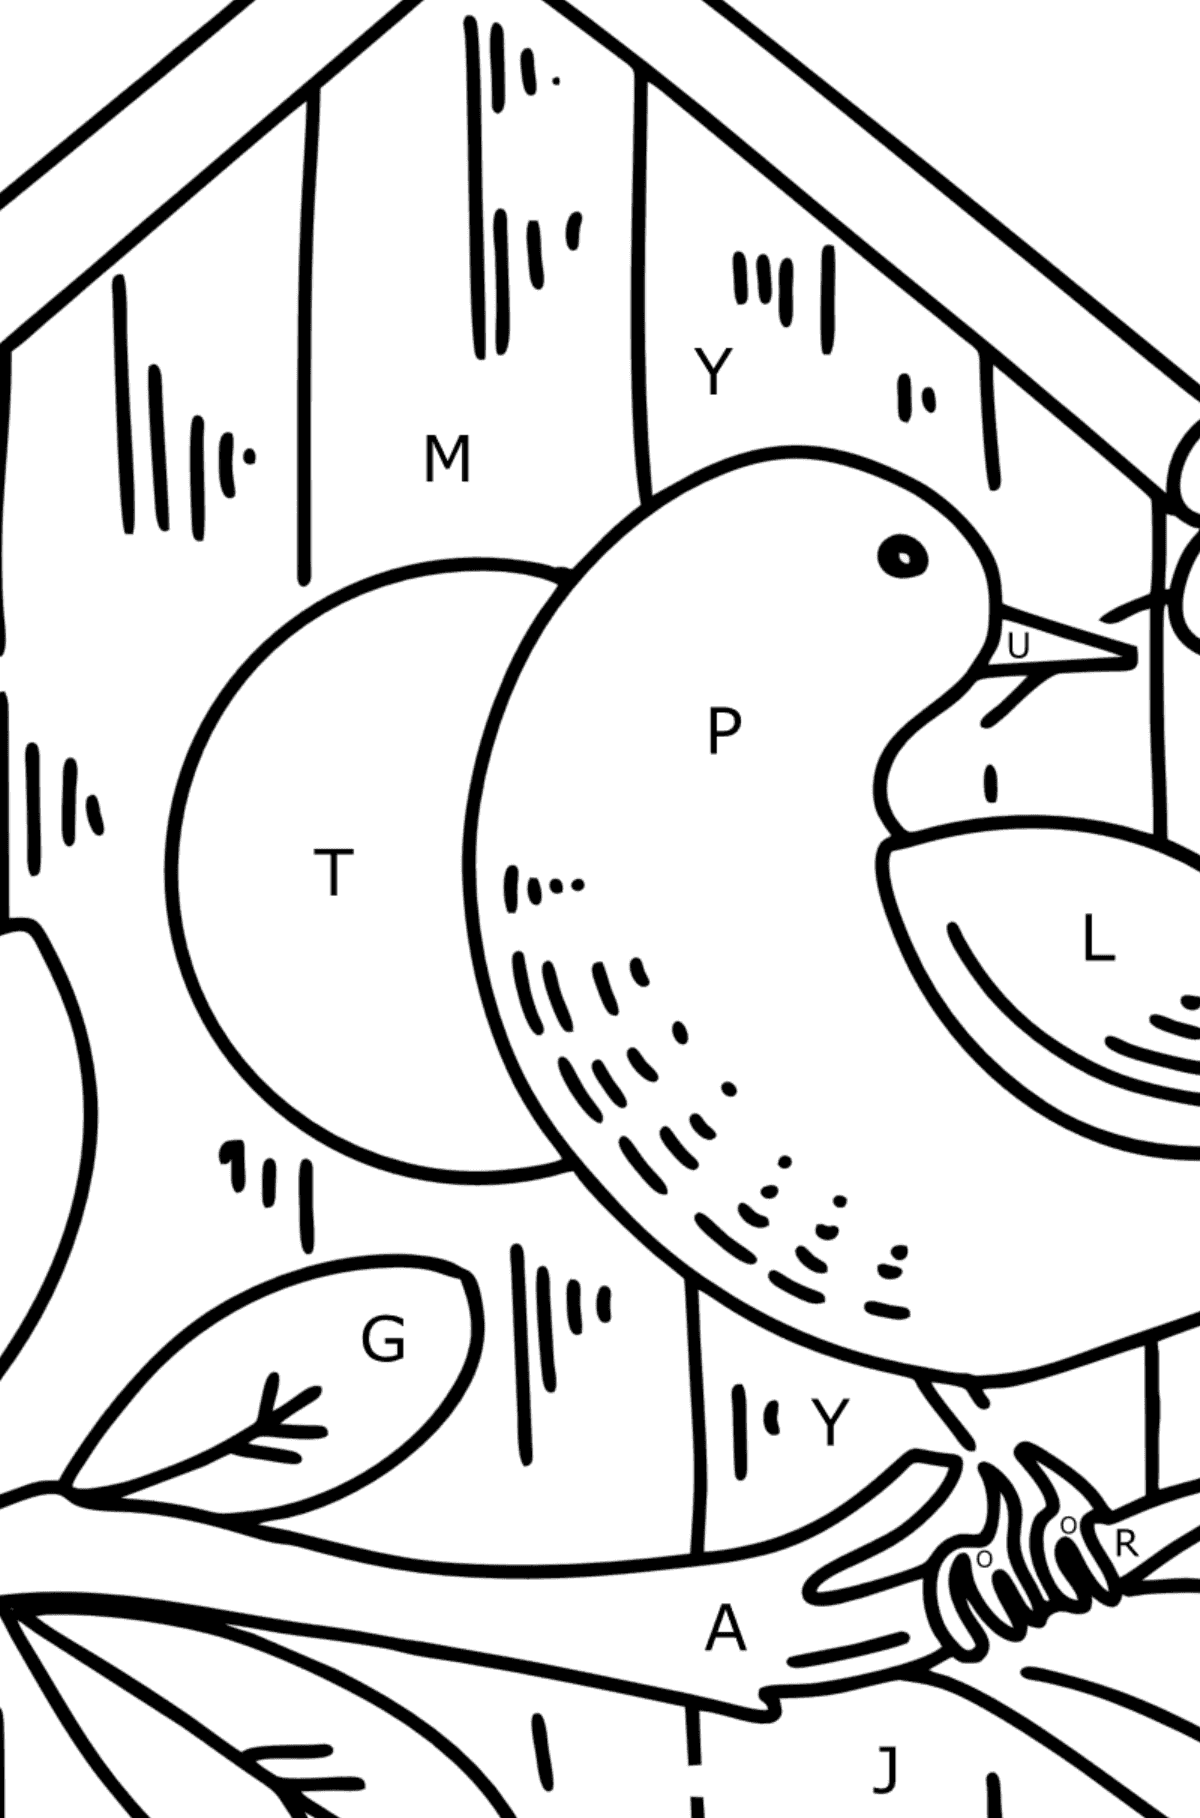 Starling at the Birdhouse coloring page - Coloring by Letters for Kids